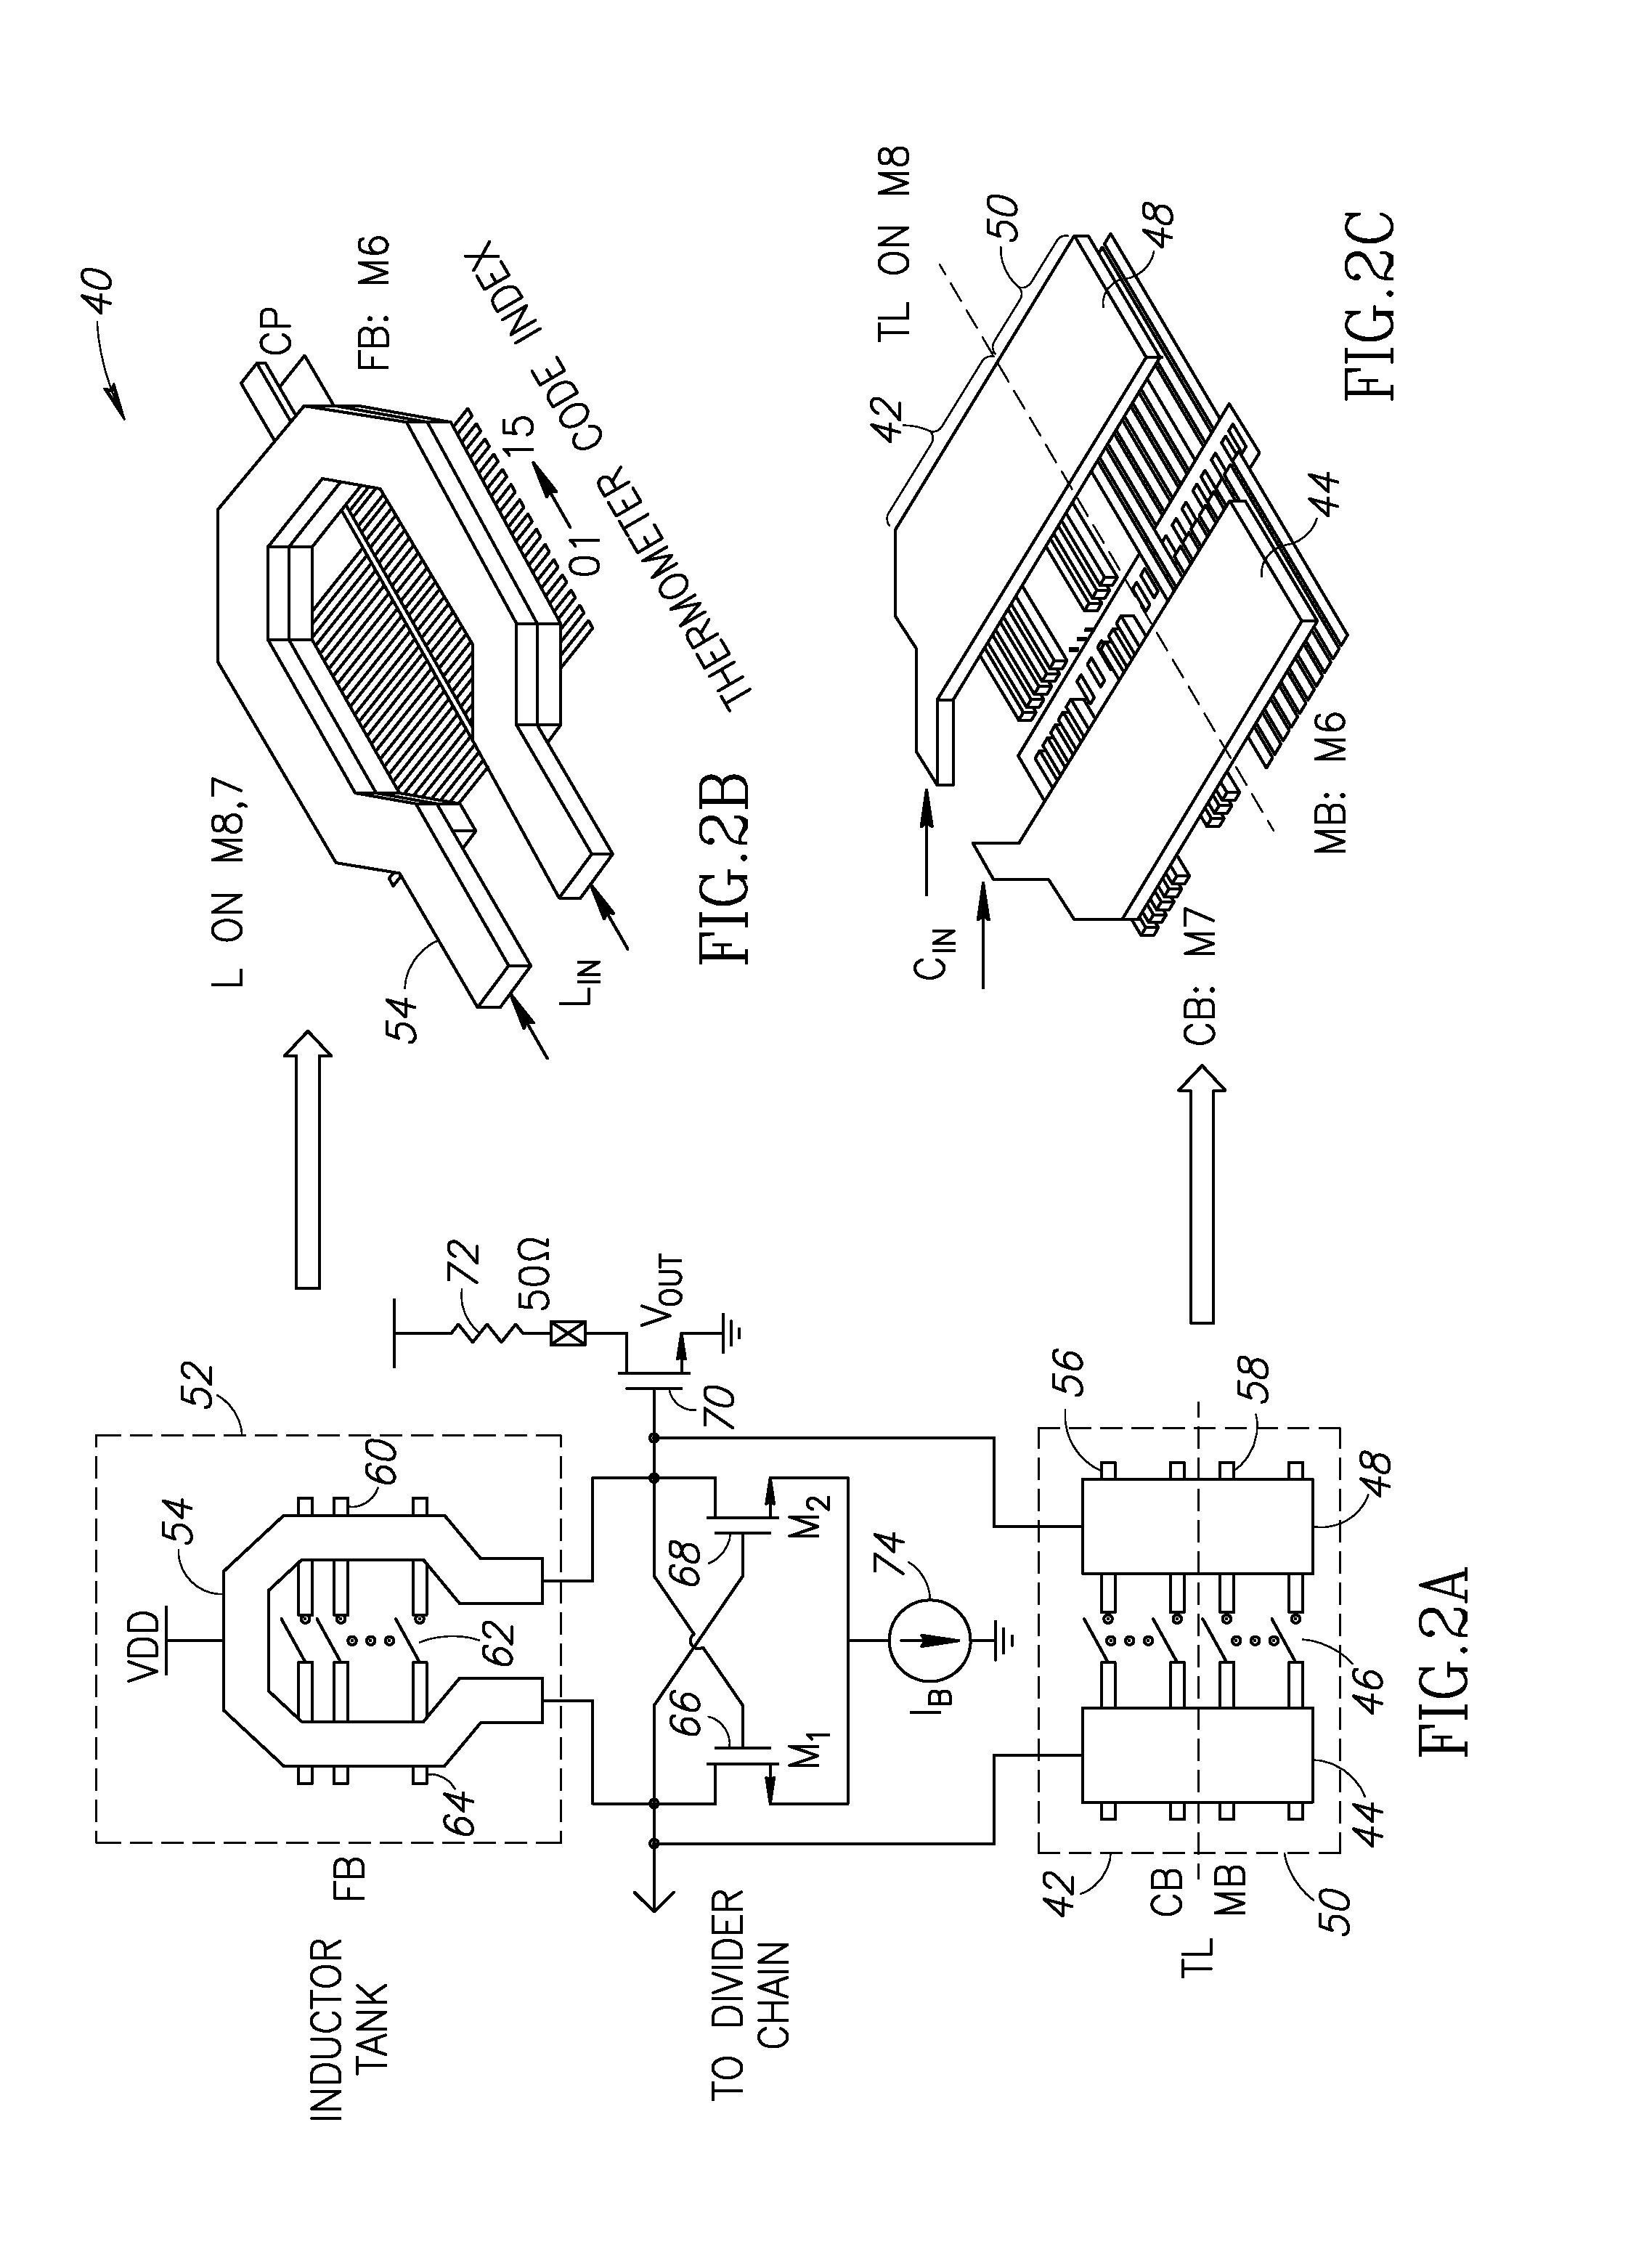 High resolution millimeter wave digitally controlled oscillator with reconfigurable distributed metal capacitor passive resonators